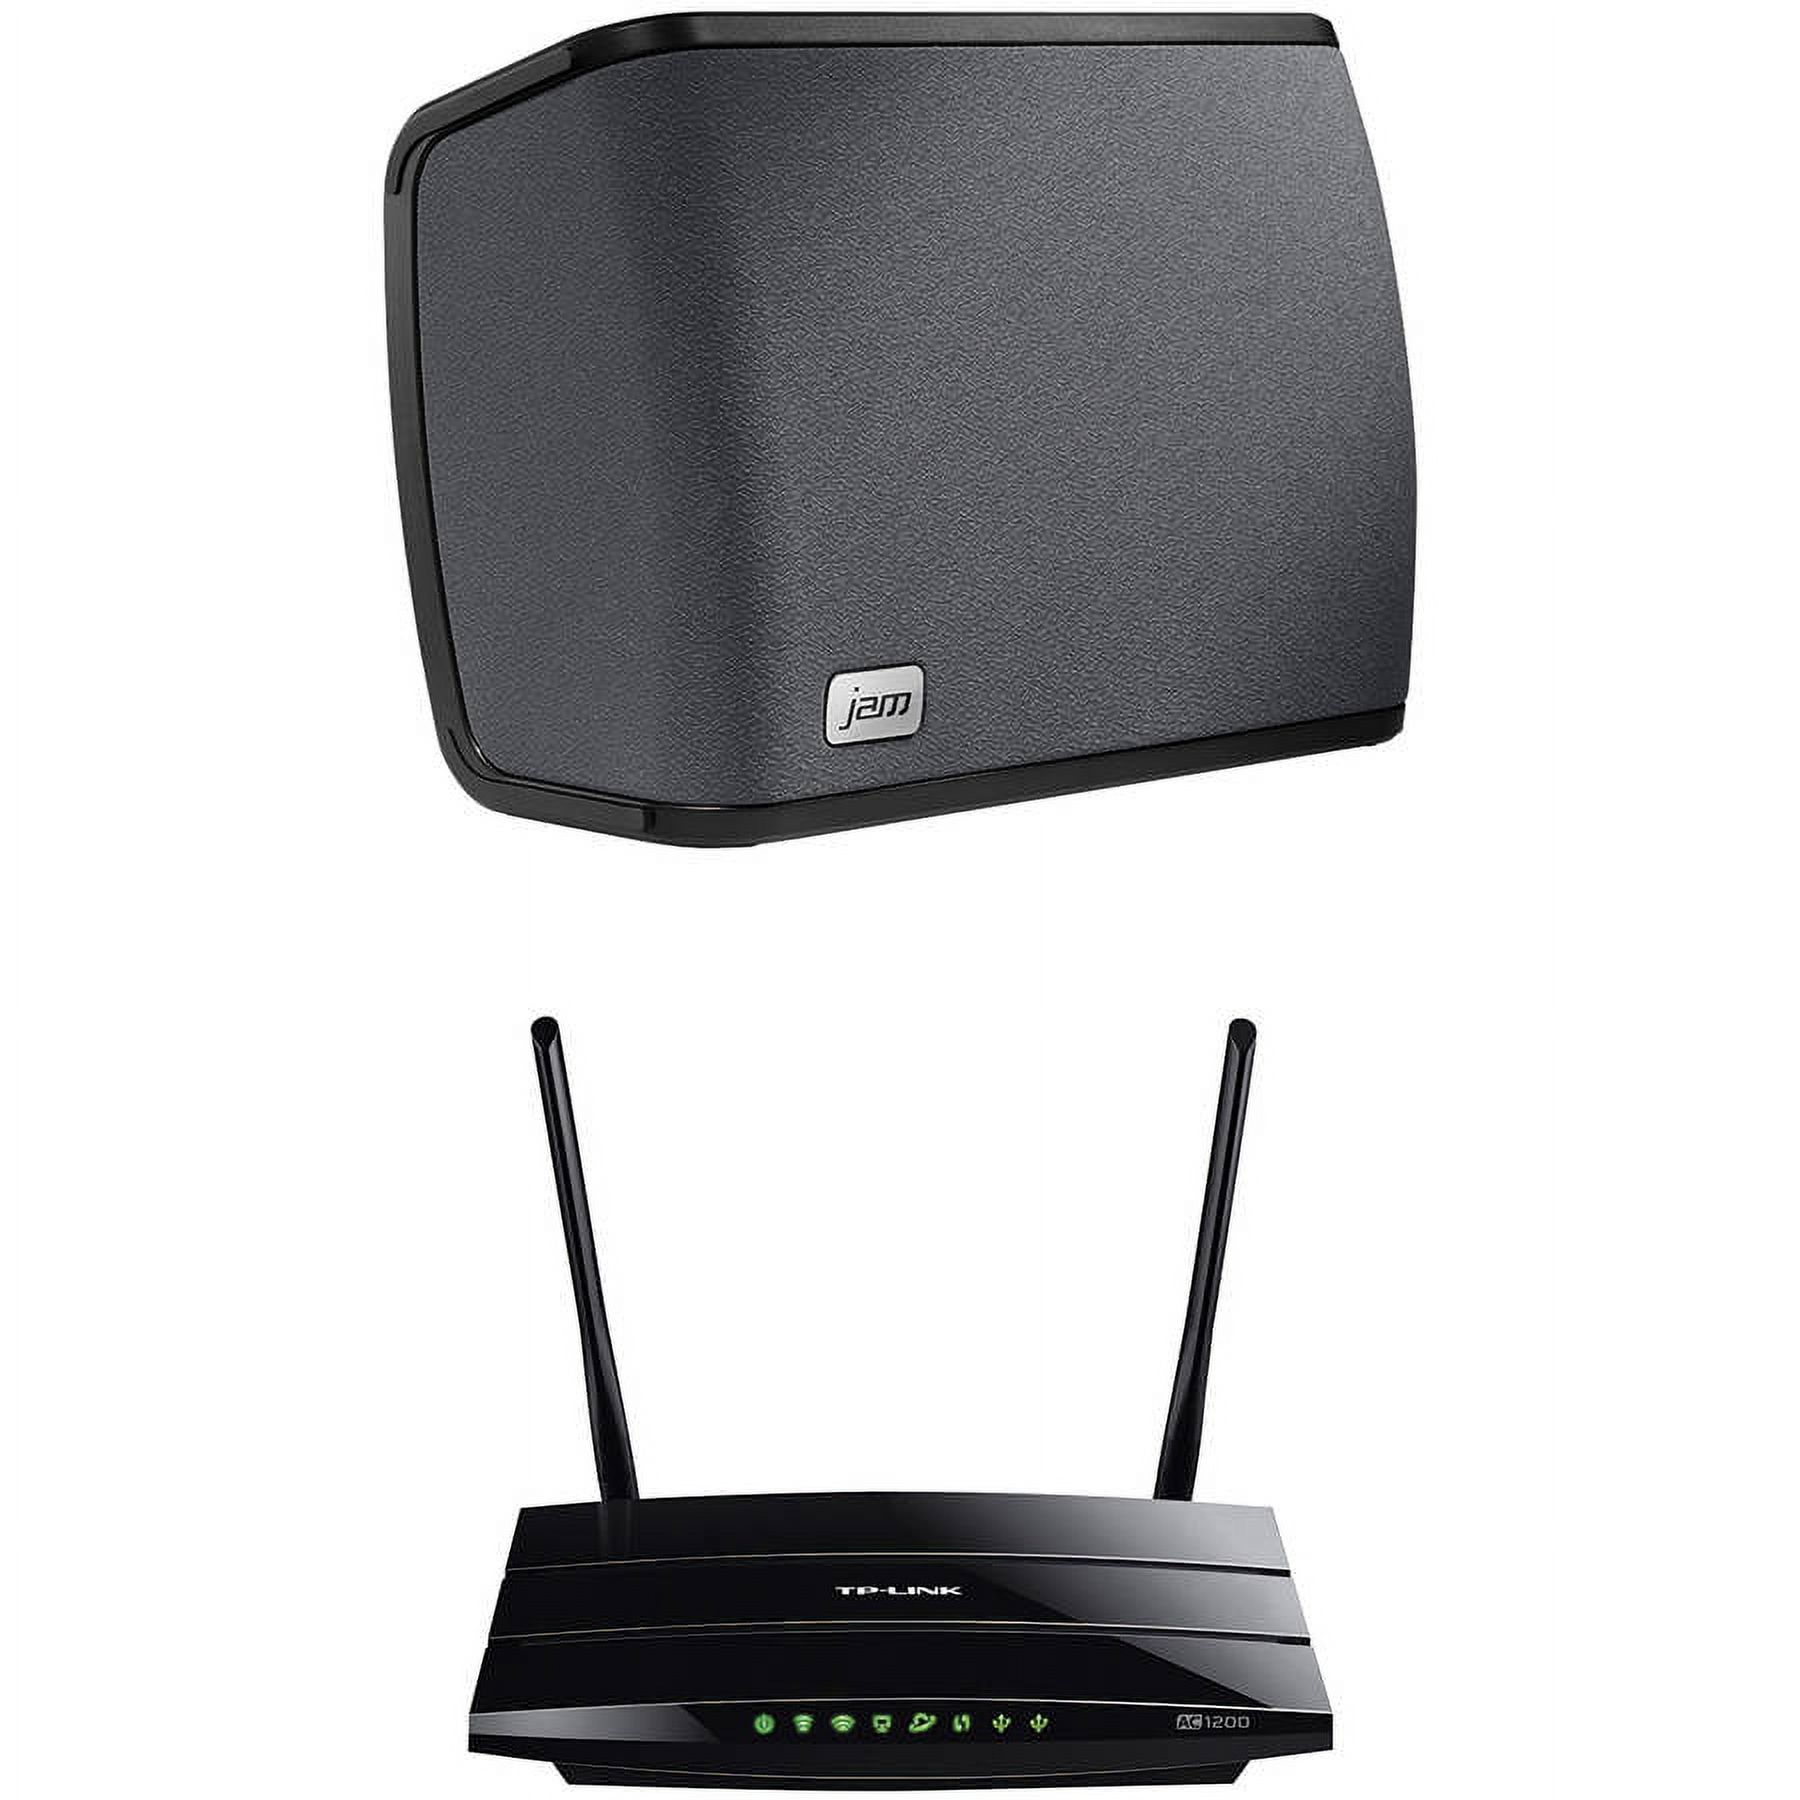 JAM Home Audio Rhythm WiFi and TP-LINK C5 AC1200 Archer Wireless Dual-Bank Gigabit Router Bundle - image 1 of 1